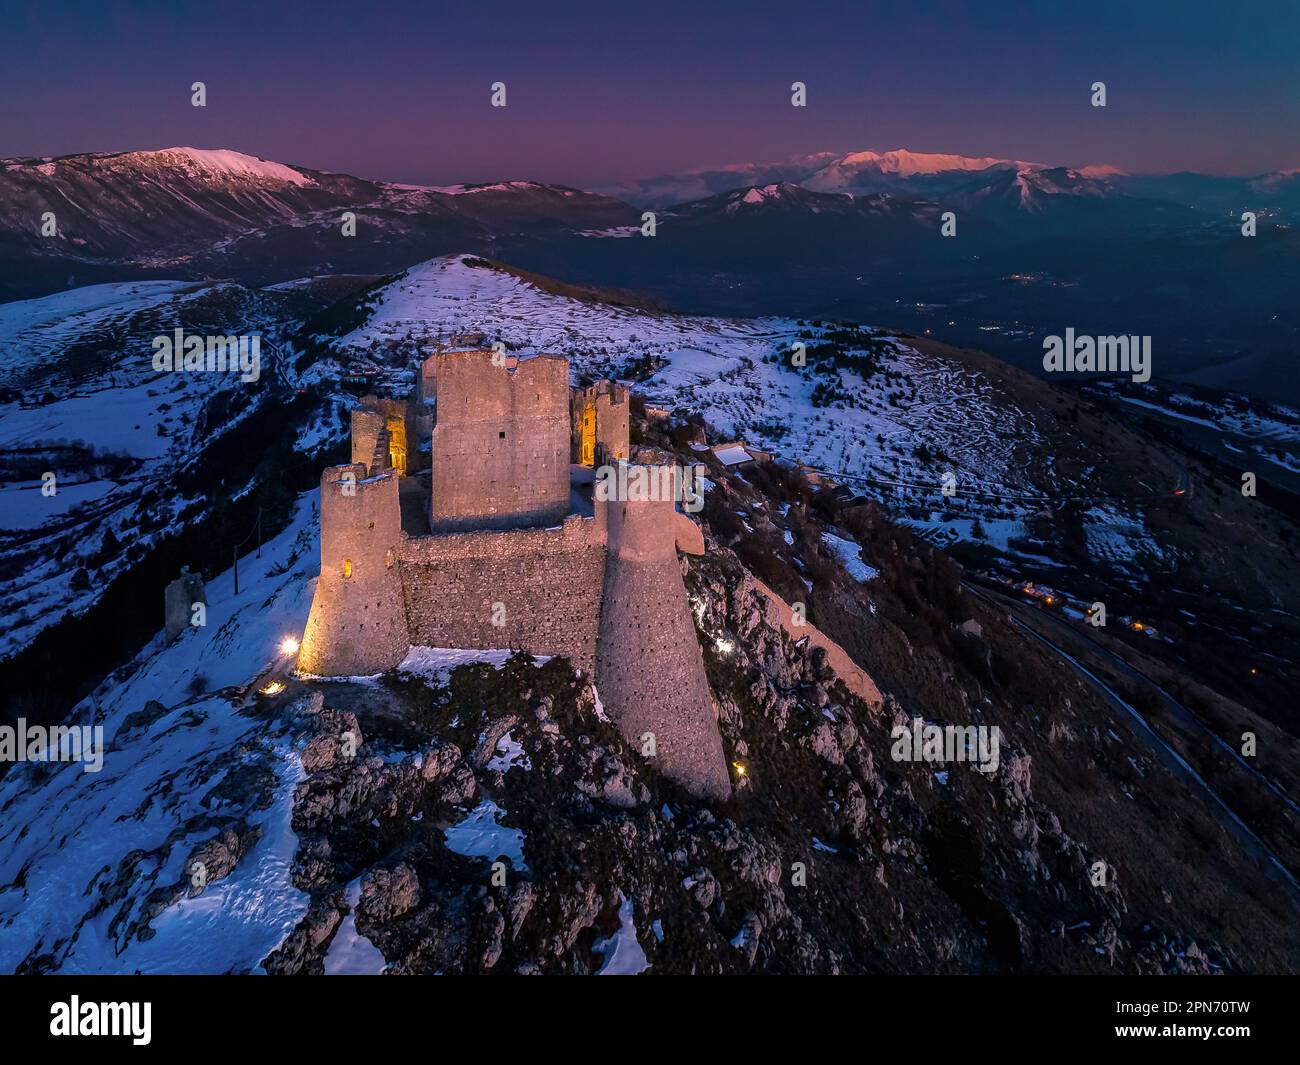 Aerial view of the Rocca di Calascio with snow and lit by the light of the sunset, in the background the mountains of the Maiella National Park. Stock Photo